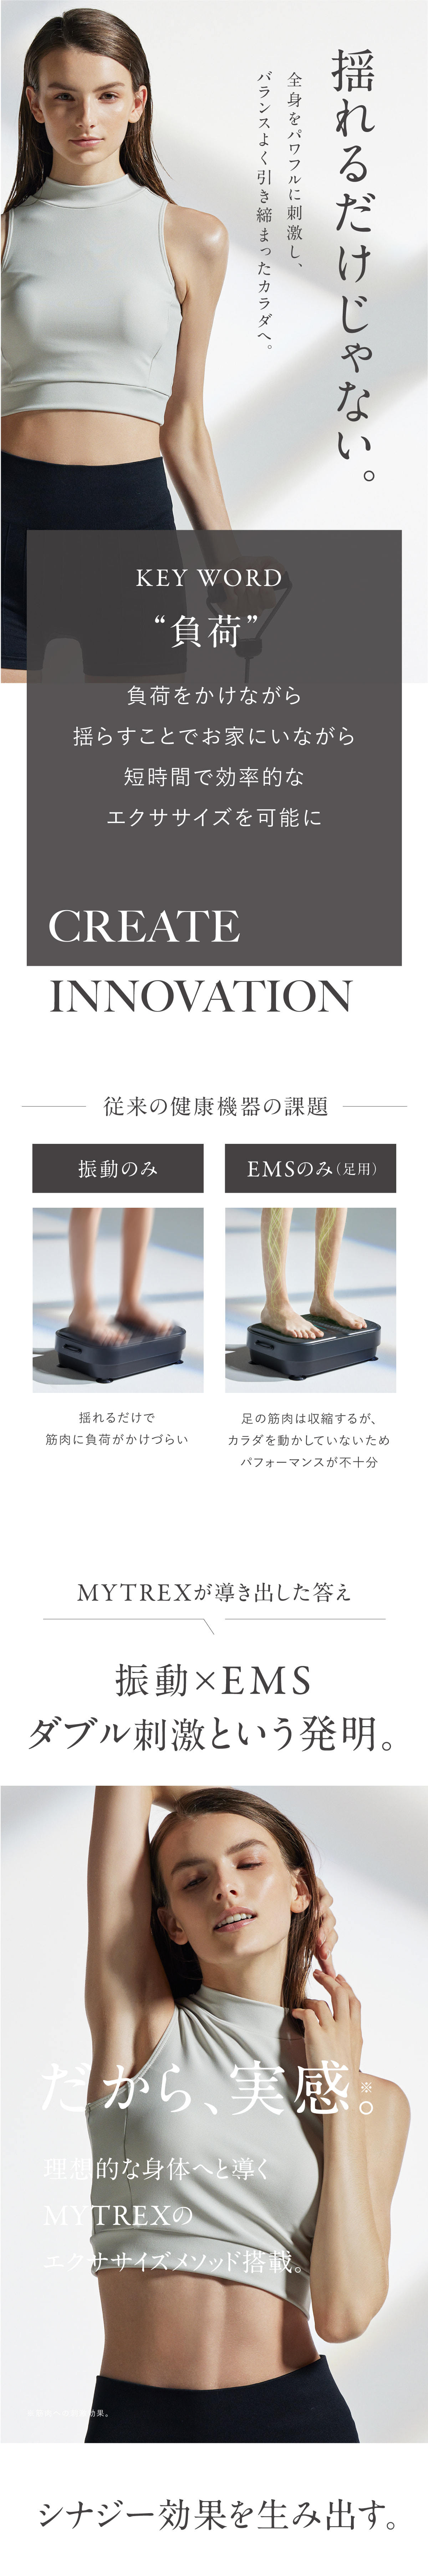 ◆MYTREX W FIT ACTIVE(EMSマシン) ◆自宅でダイエット◆